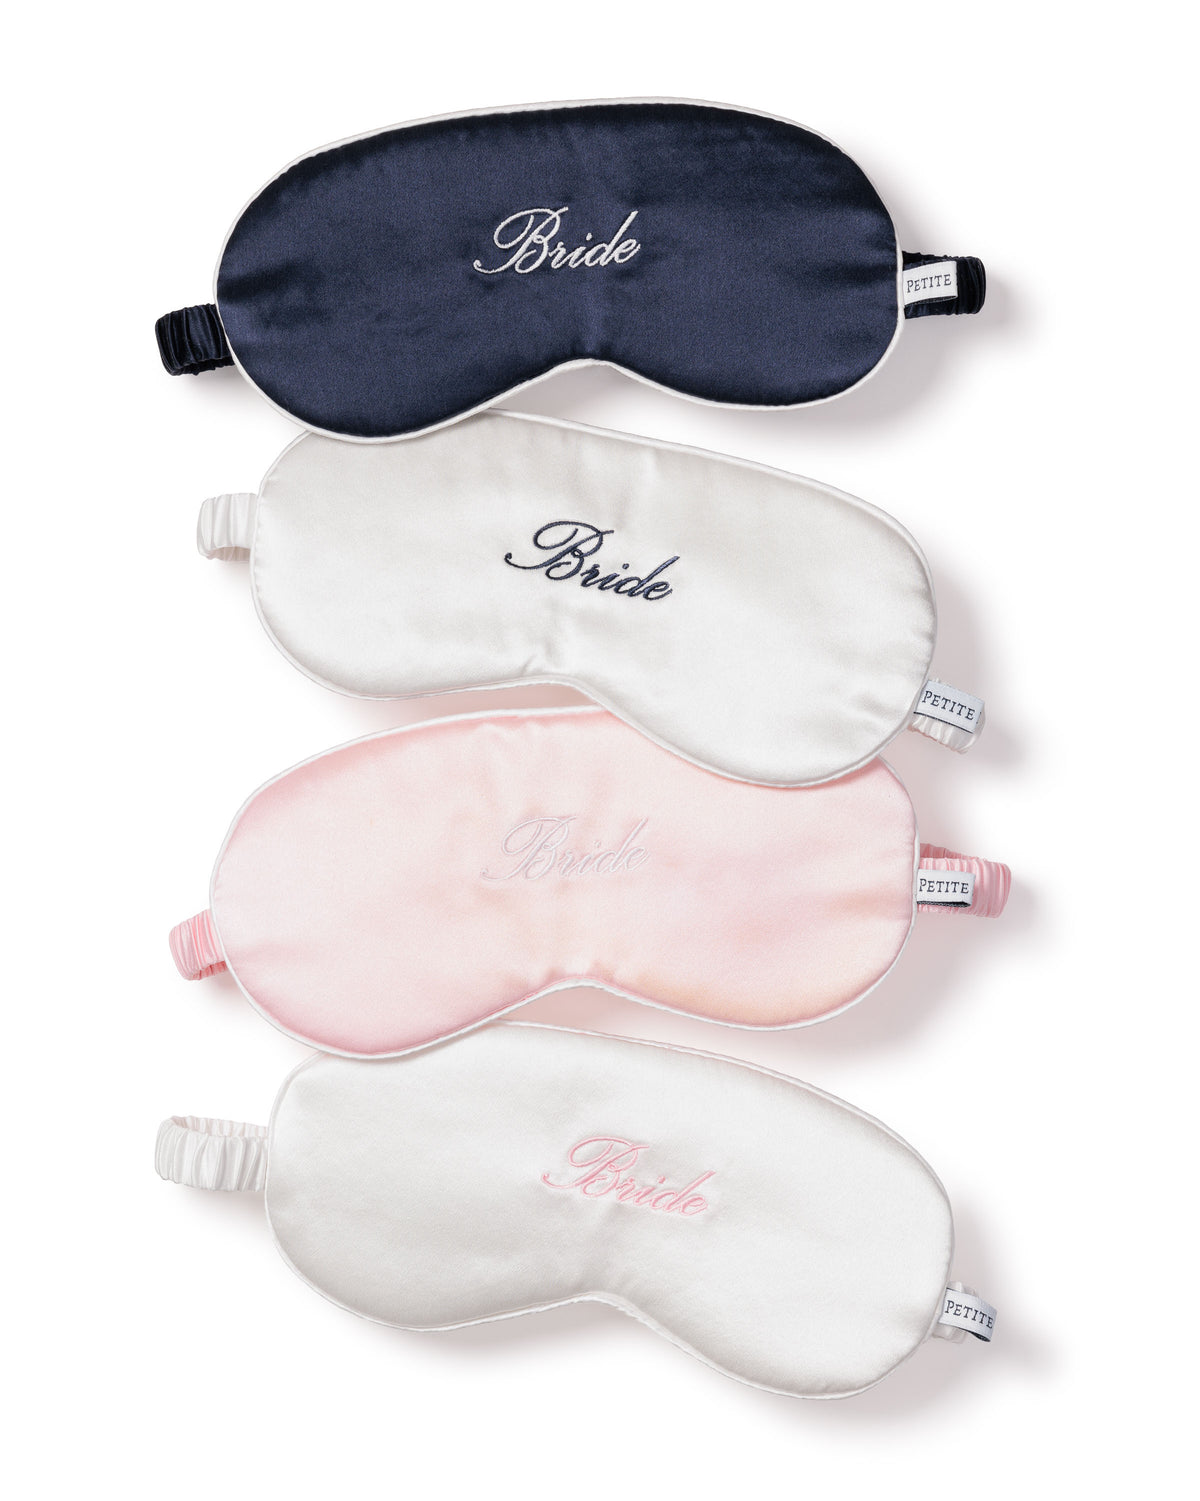 White Silk Bride Sleep Mask with Pink Embroidery